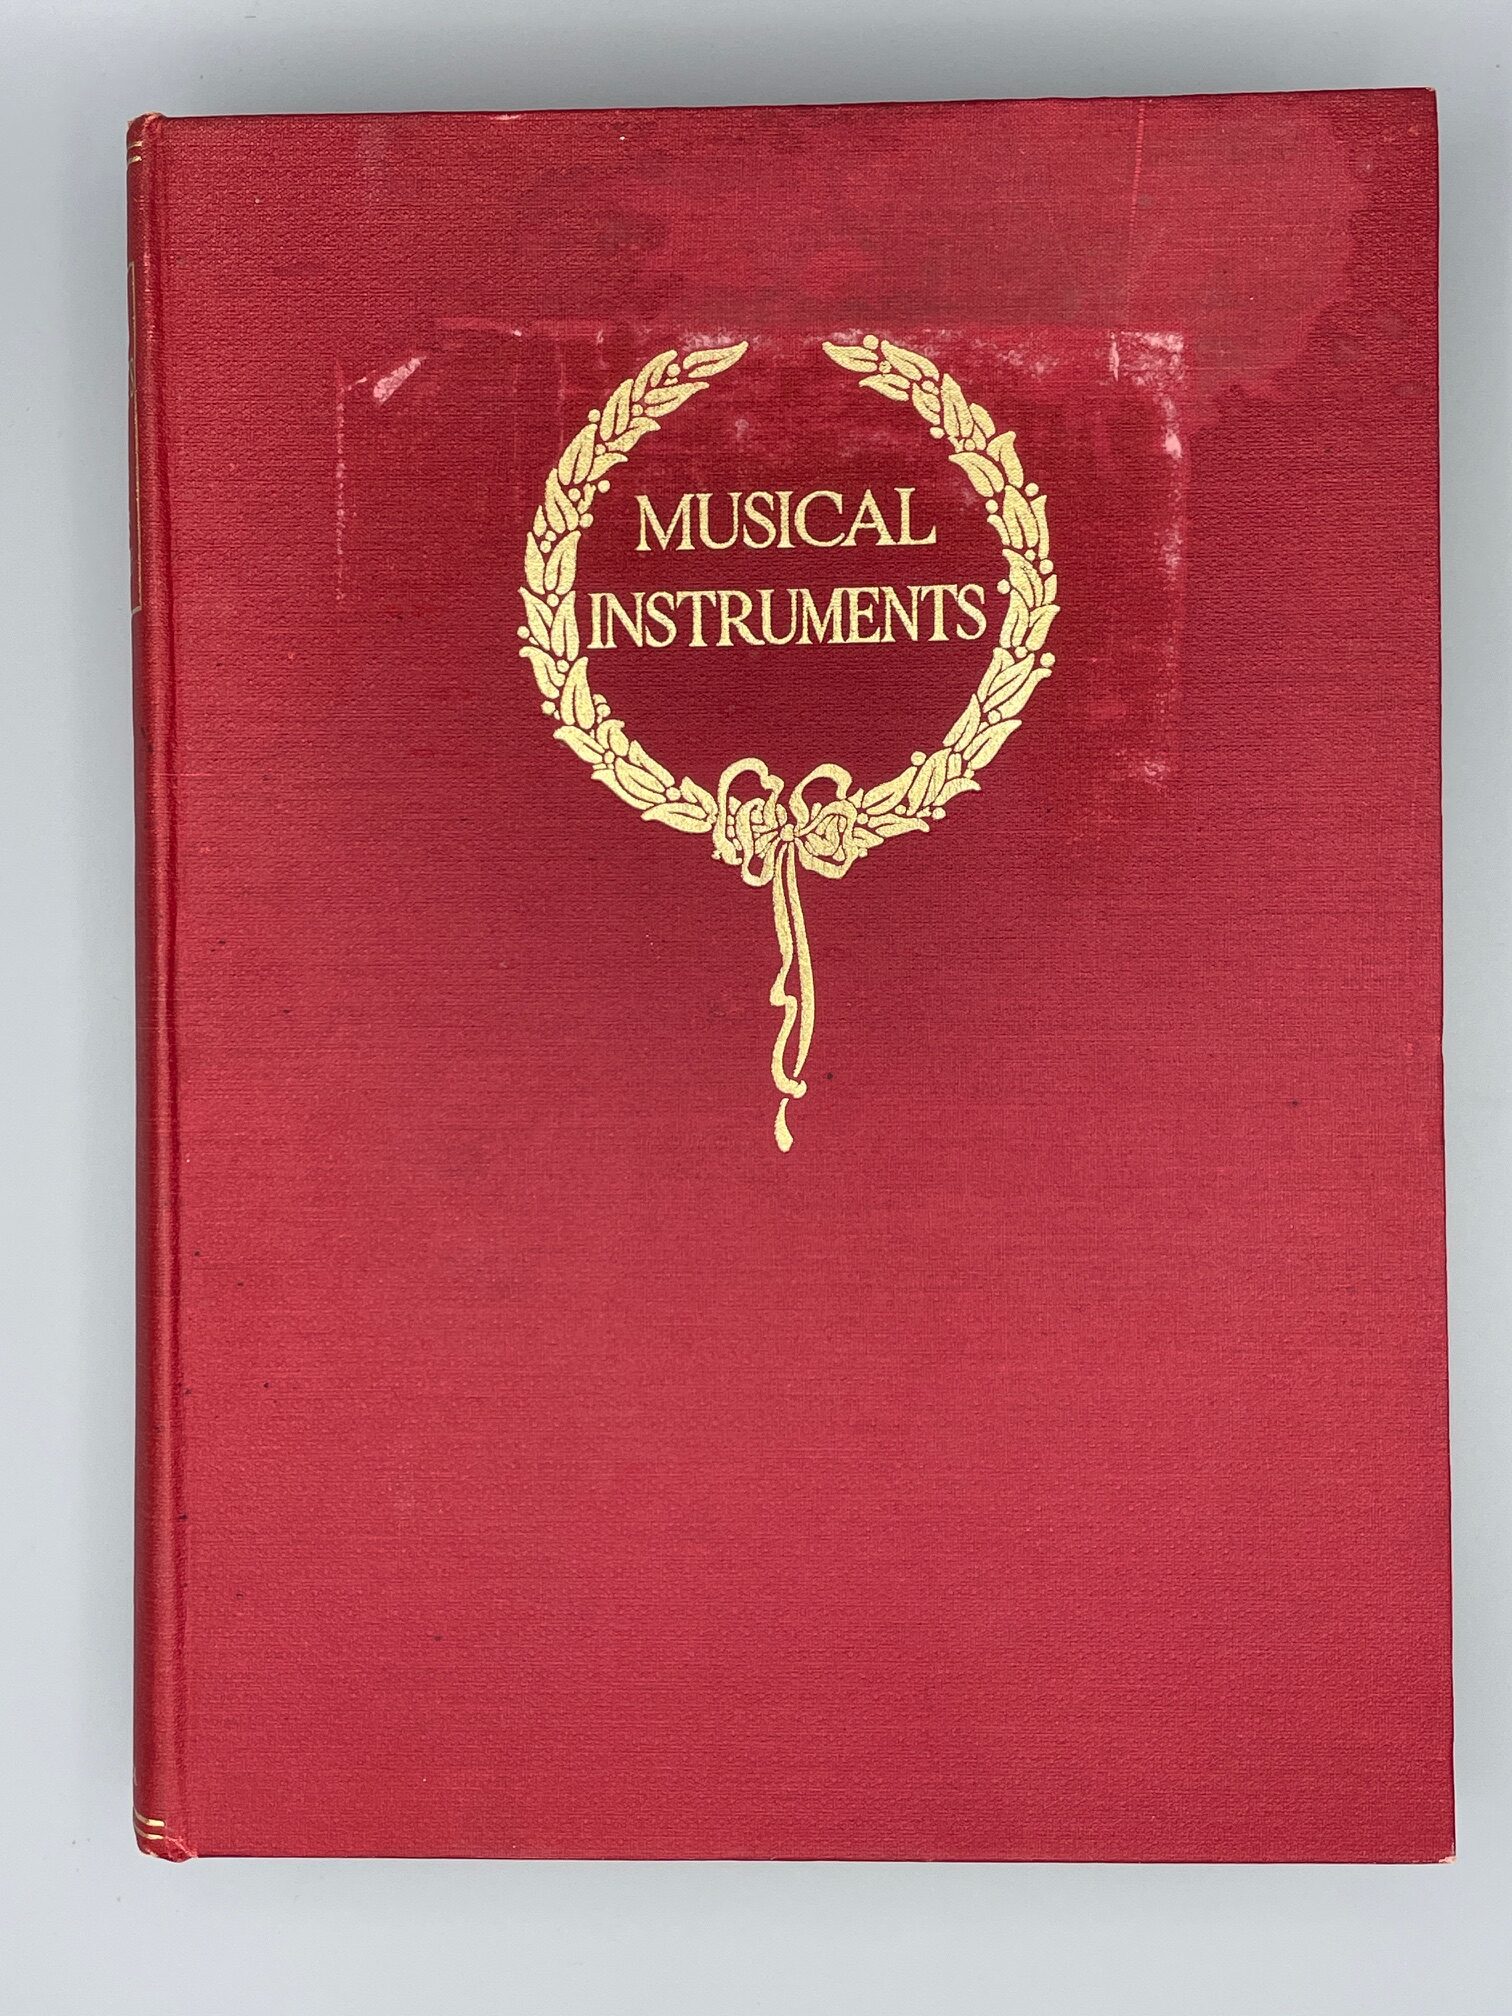 Musical-instruments-book-vm-collectables-1